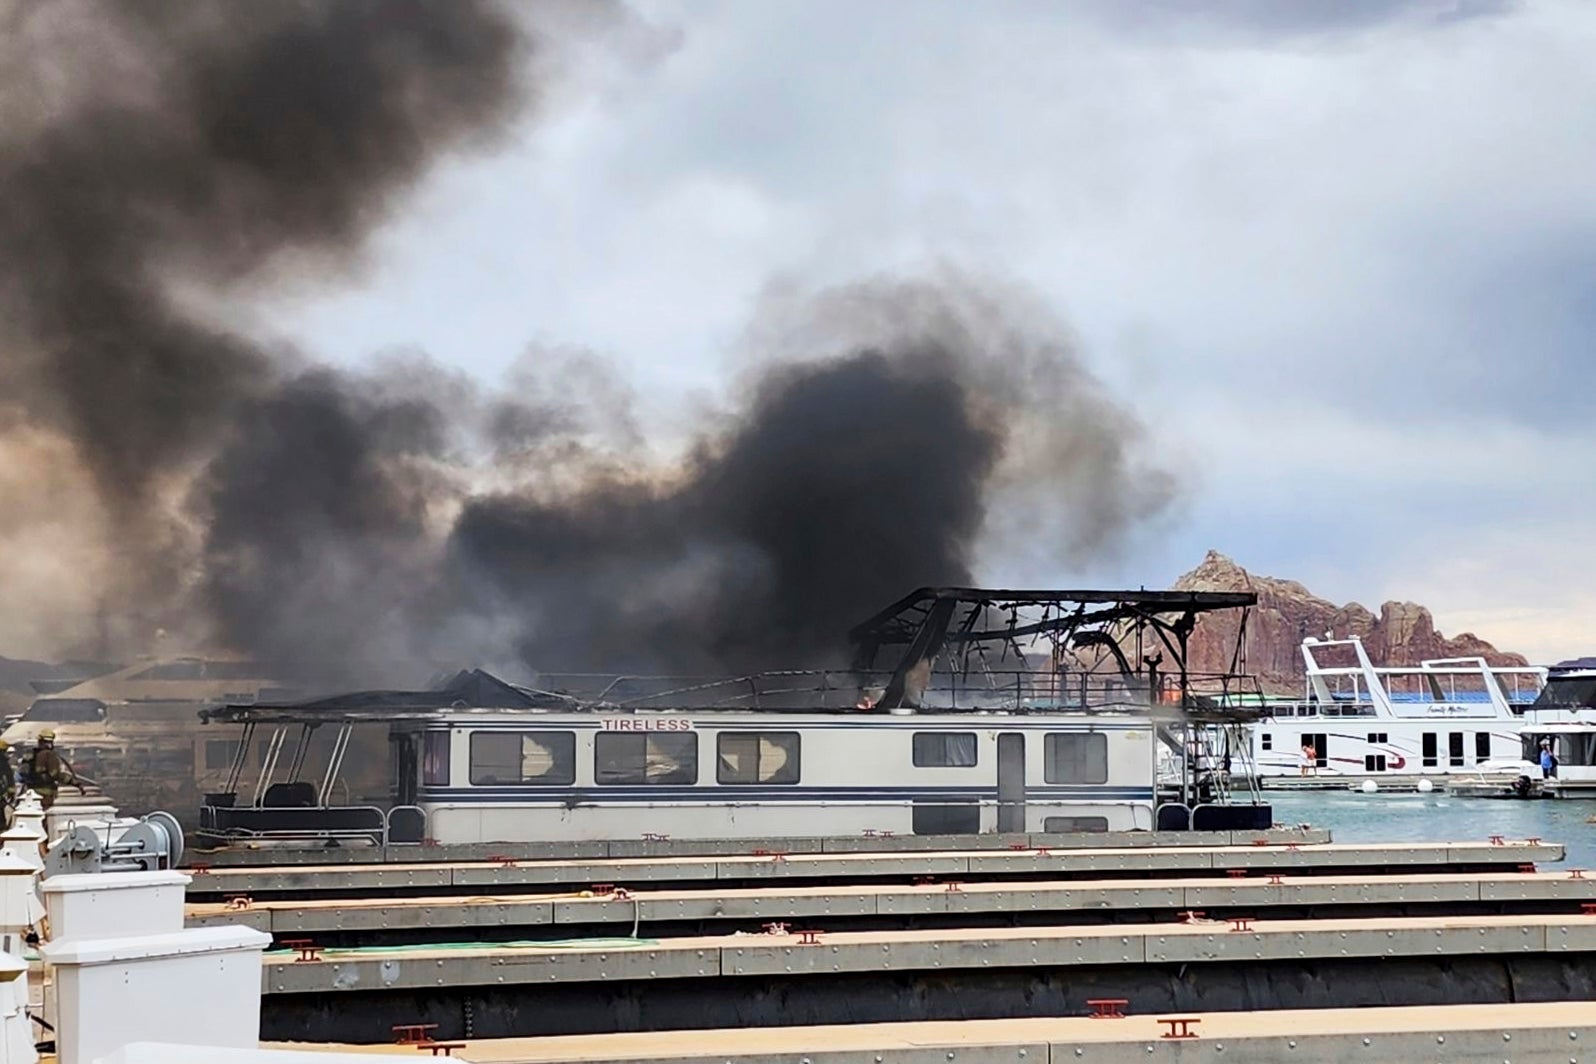 Houseboats catch fire at popular destination Lake Powell on Utah